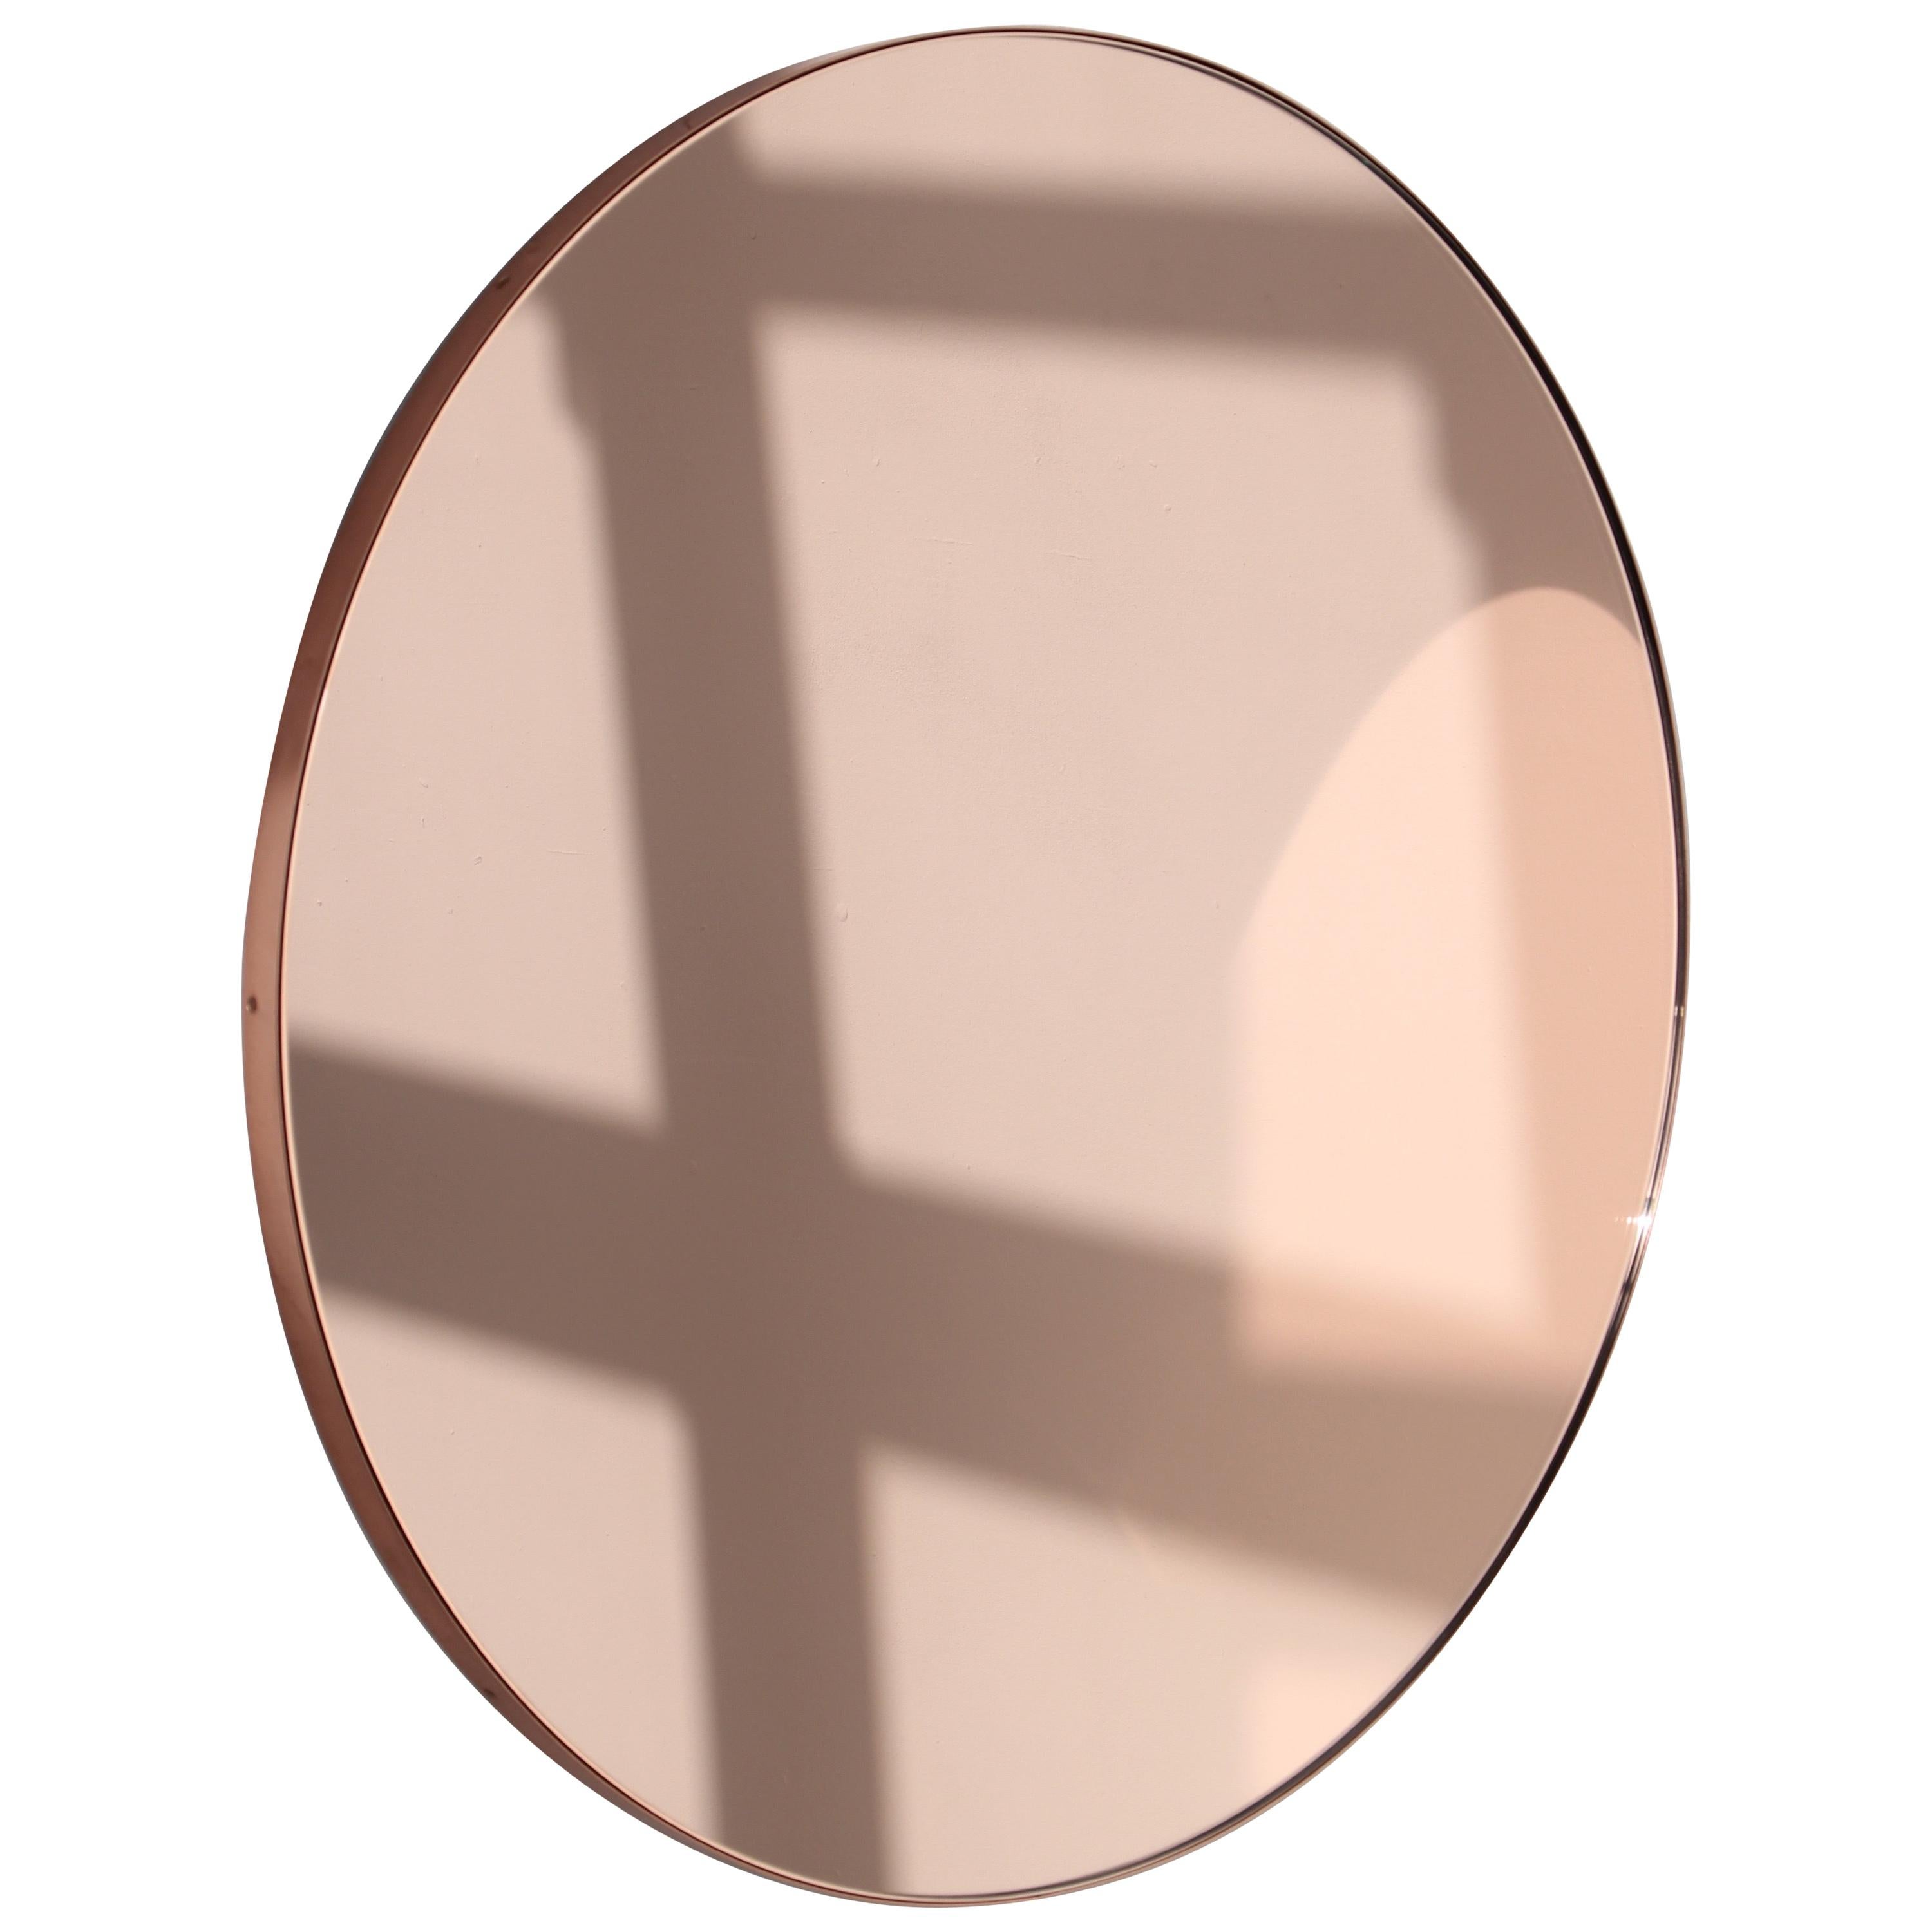 Orbis Rose Gold / Peach Tinted Round Modern Mirror with Copper Frame, Regular For Sale